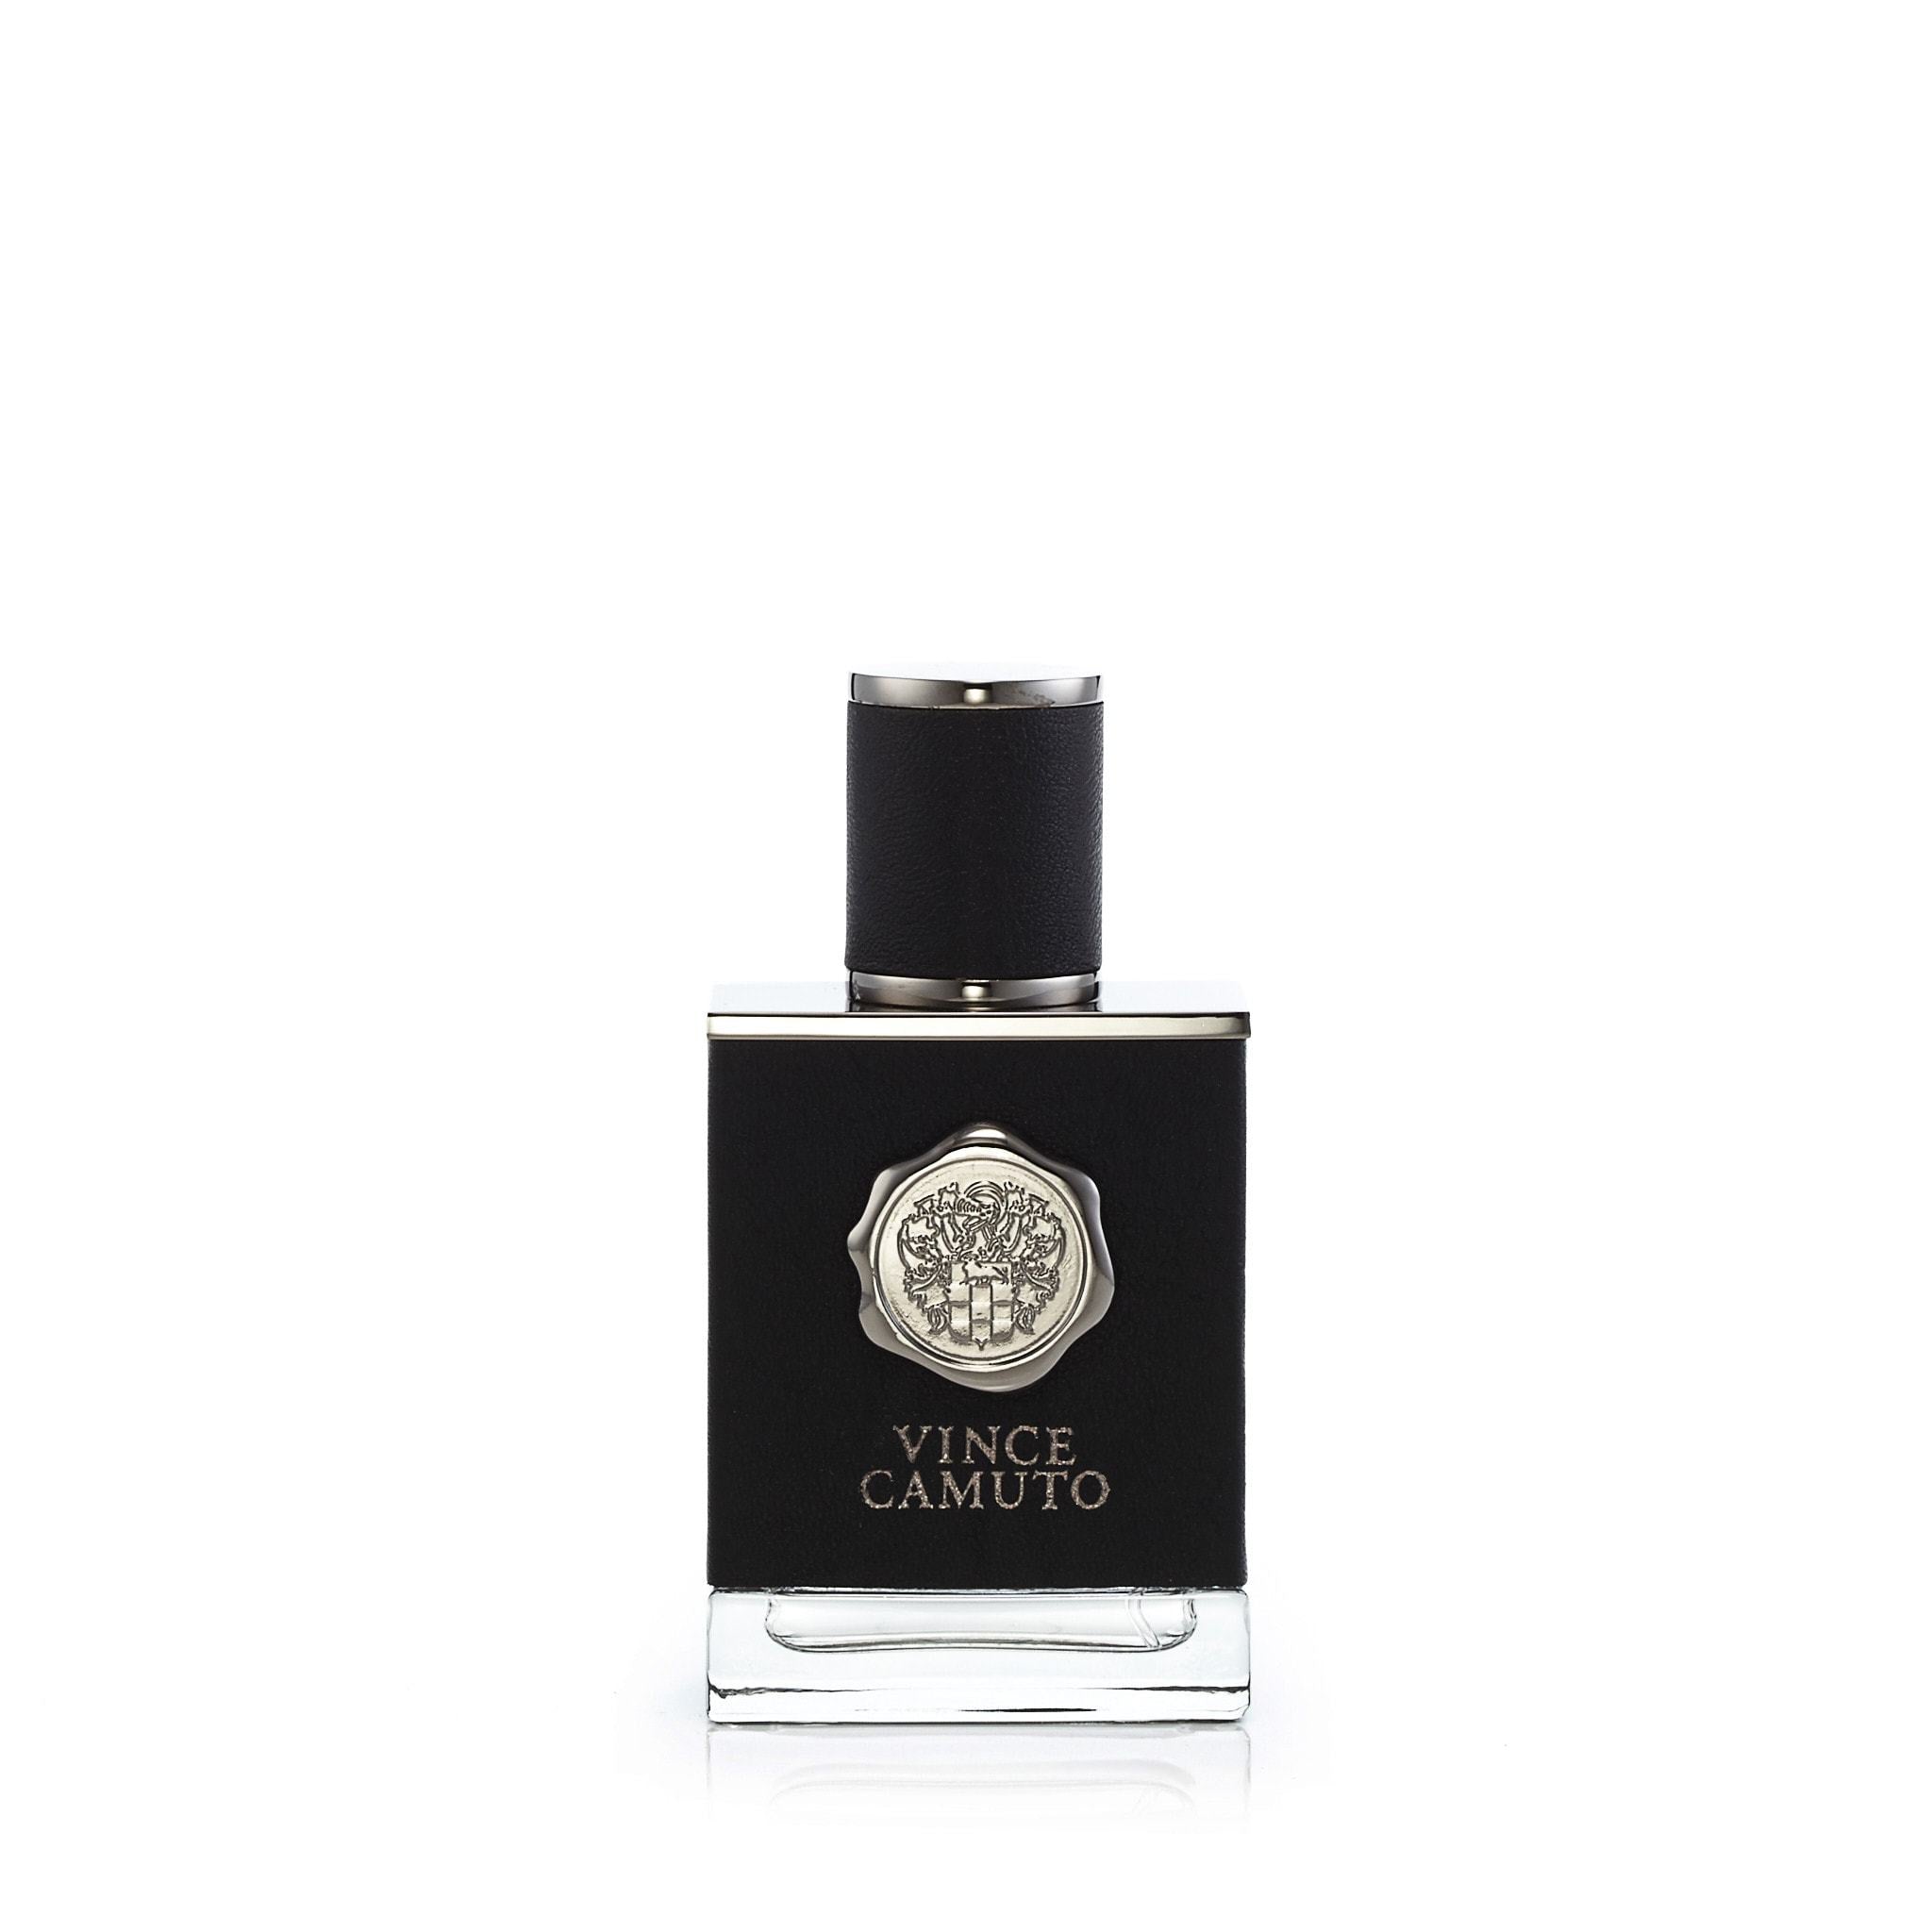 VINCE CAMUTO SMOKED OUD by Vince Camuto cologne men EDT 3.3 /3.4 oz Ne